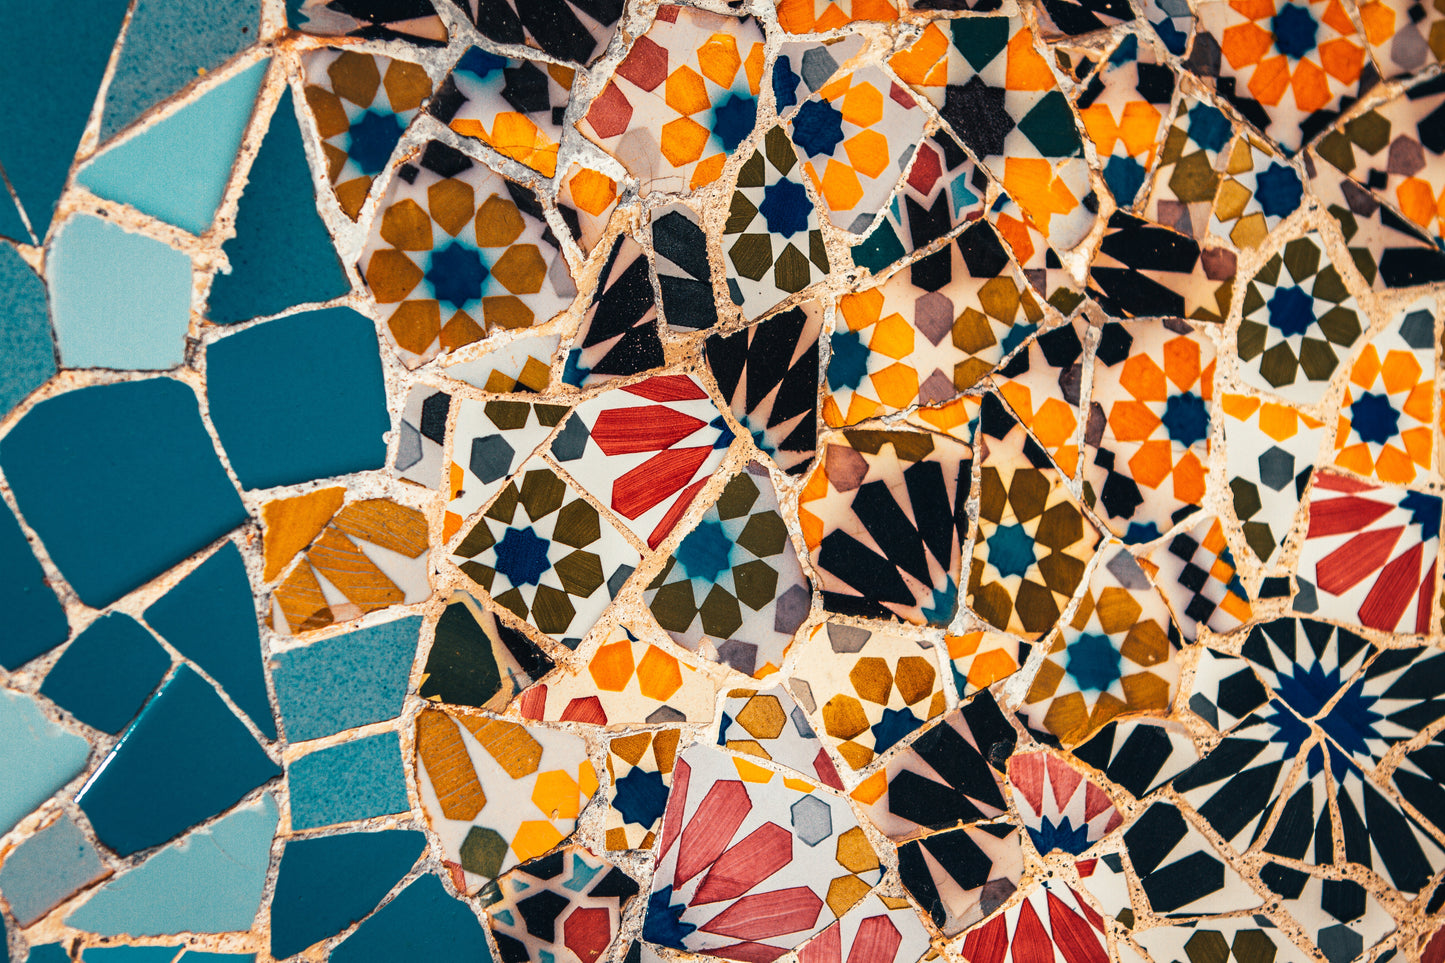 MOSAIC MAGIC: CRAFT YOUR OWN HOME MASTERPIECE with ANNIE ARCHIMANDRITOU